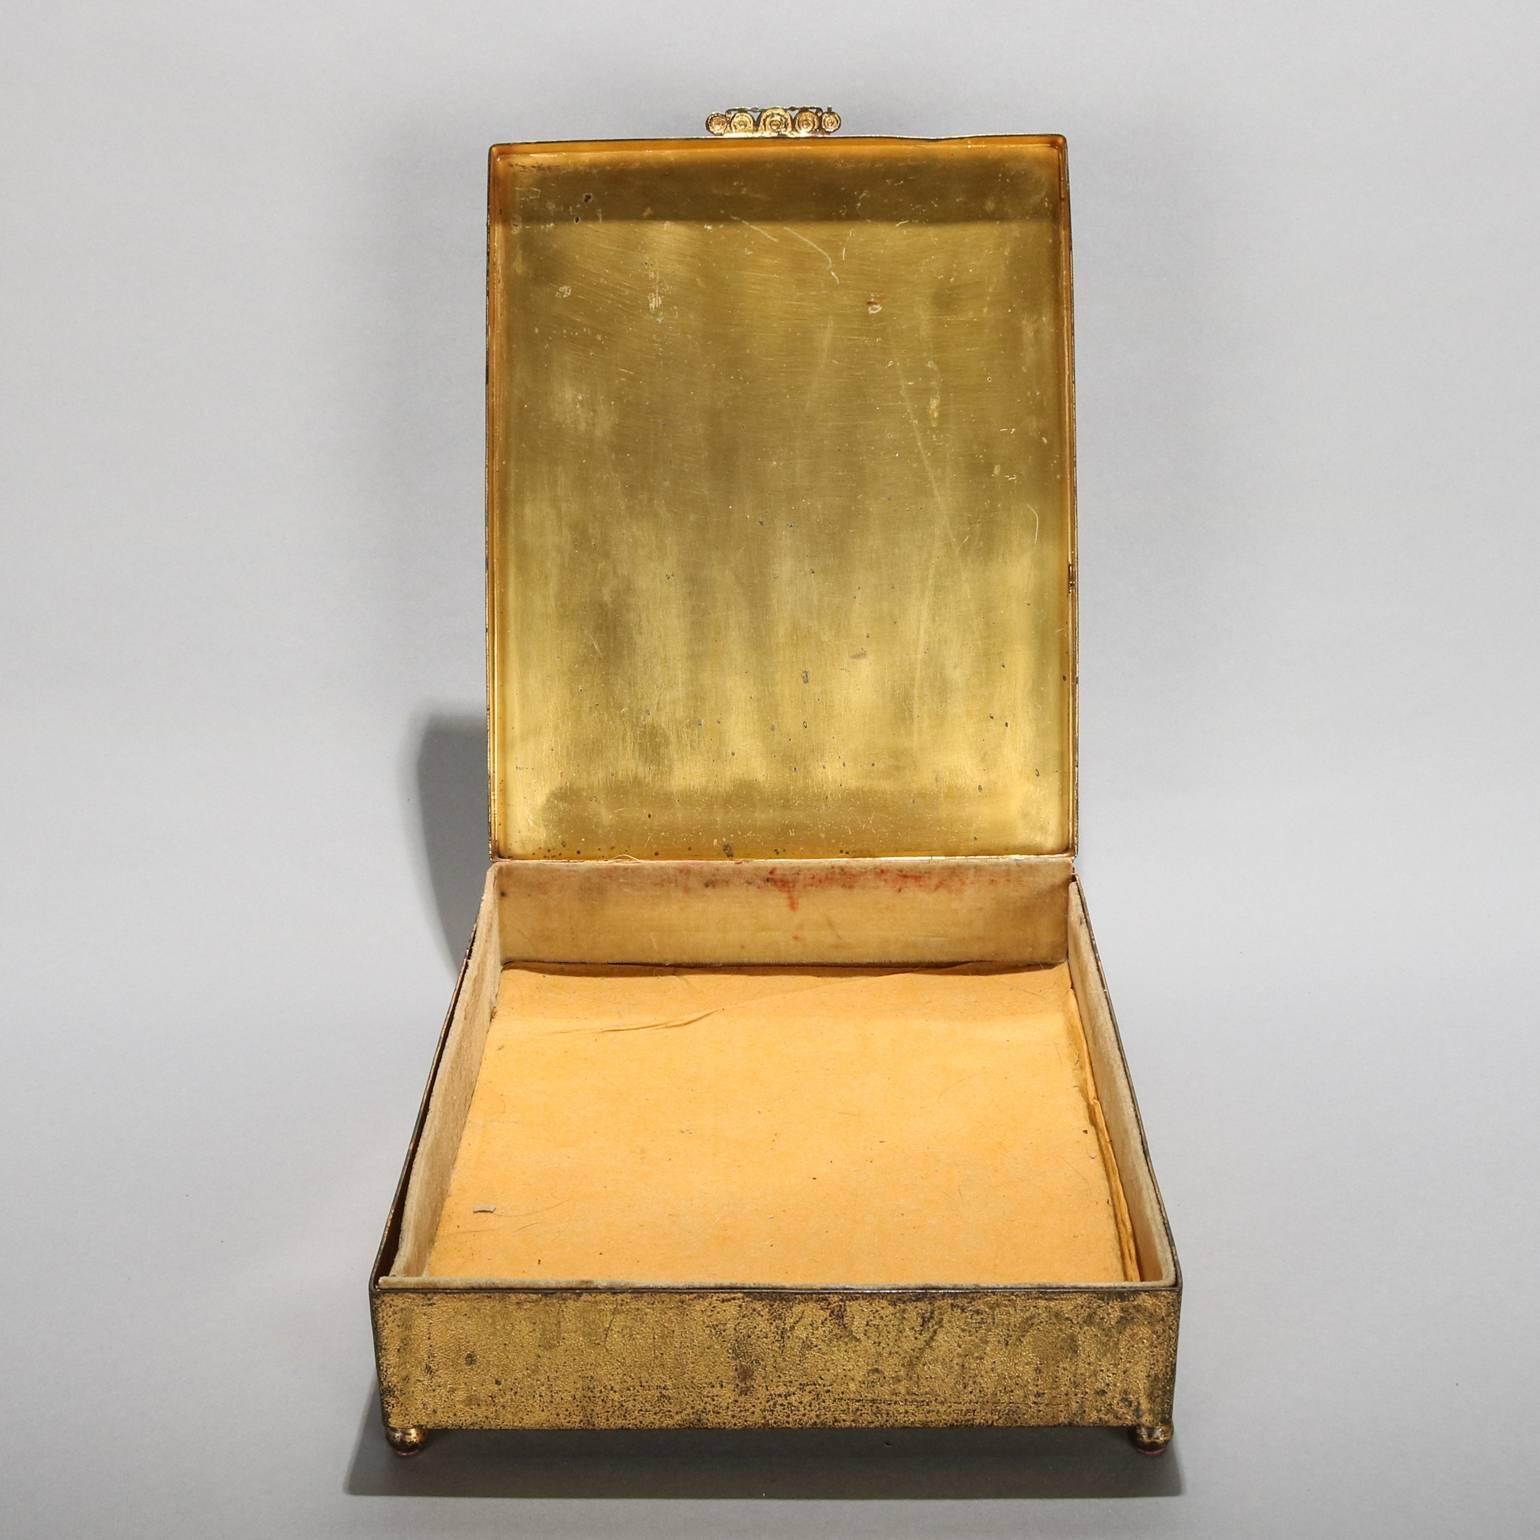 Antique gilt metal footed Bible box by E. & J. B. Empire art gold features cast floral and foliate all-over decoration, jeweled highlights, and central embroidered reserve of the Holy Family (baby Jesus Christ, Mother Mary and David), 19th